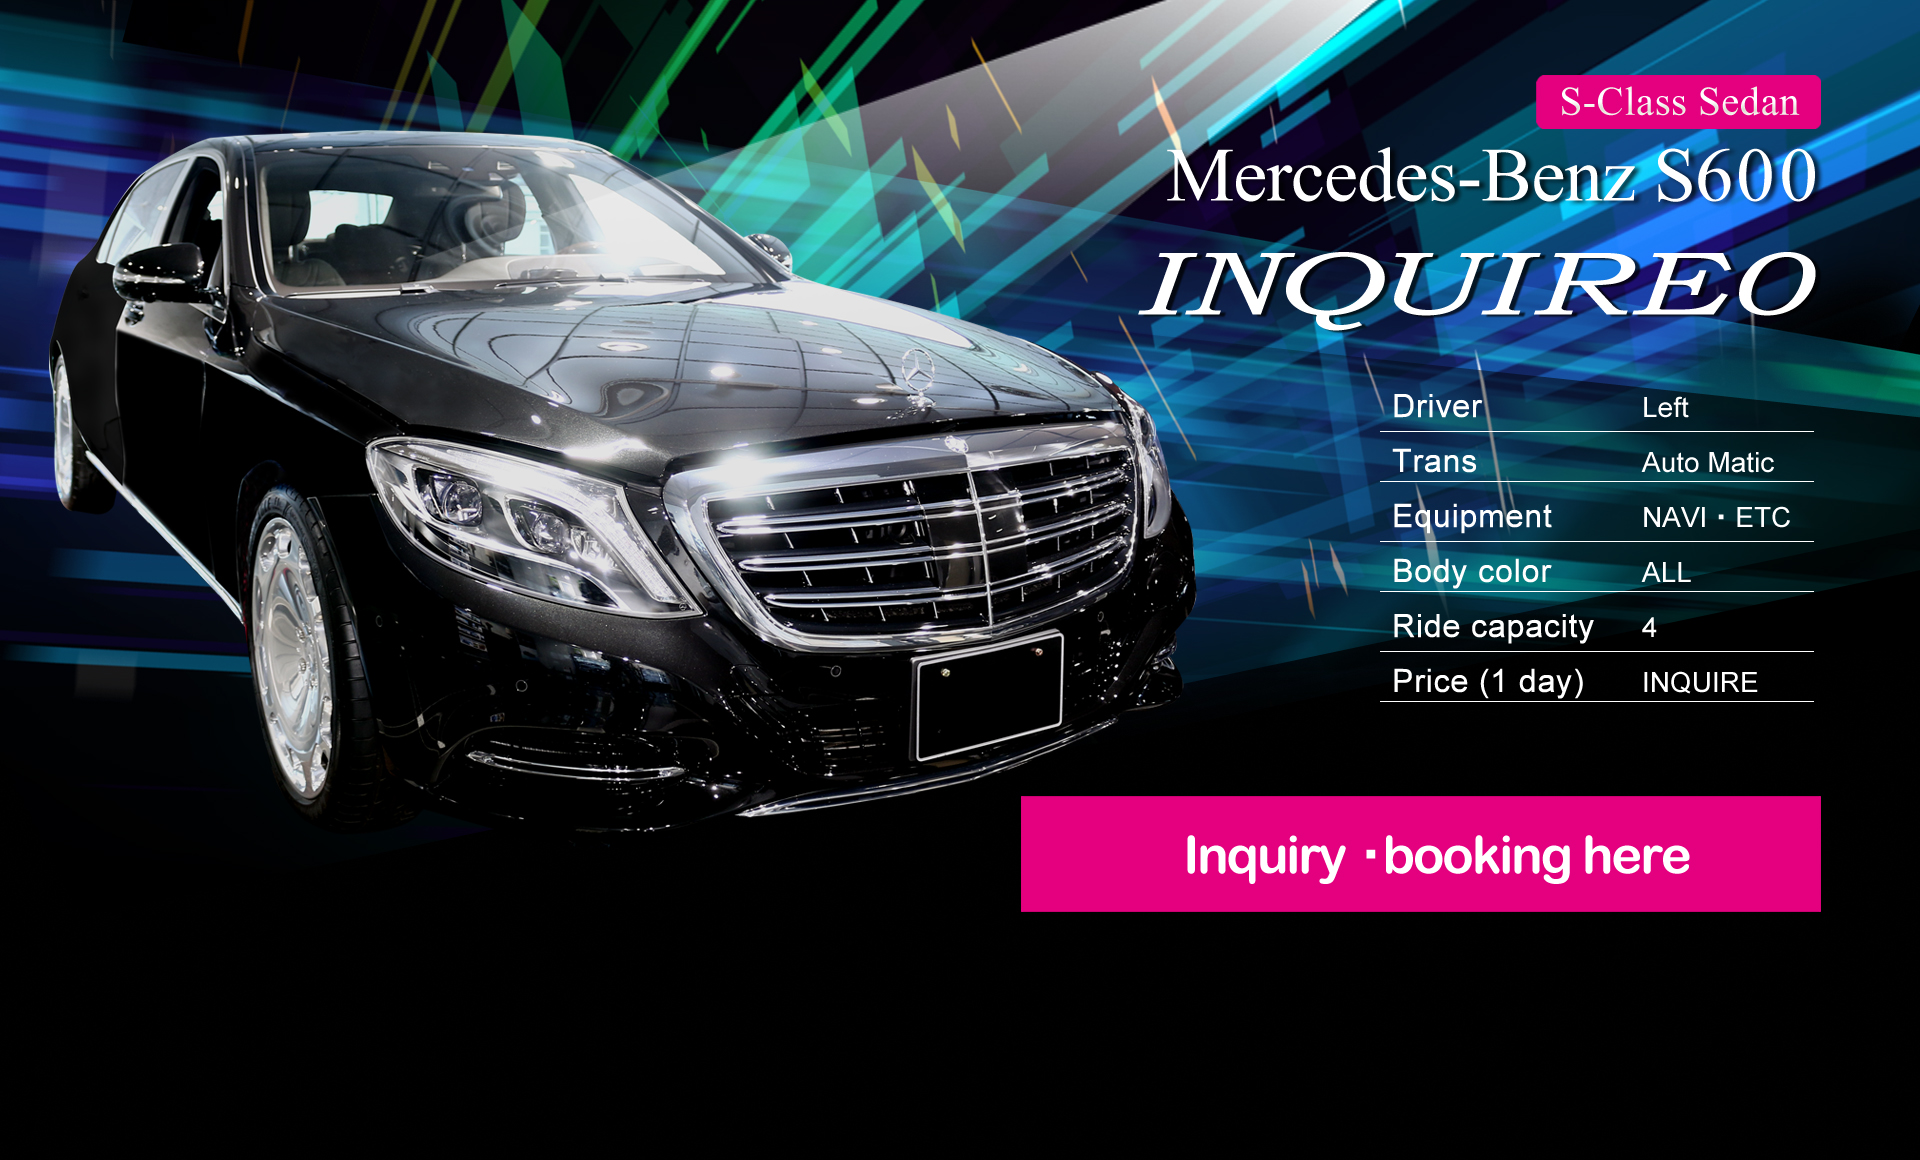 Mercedes-Benz S600 Inquiry　booking here